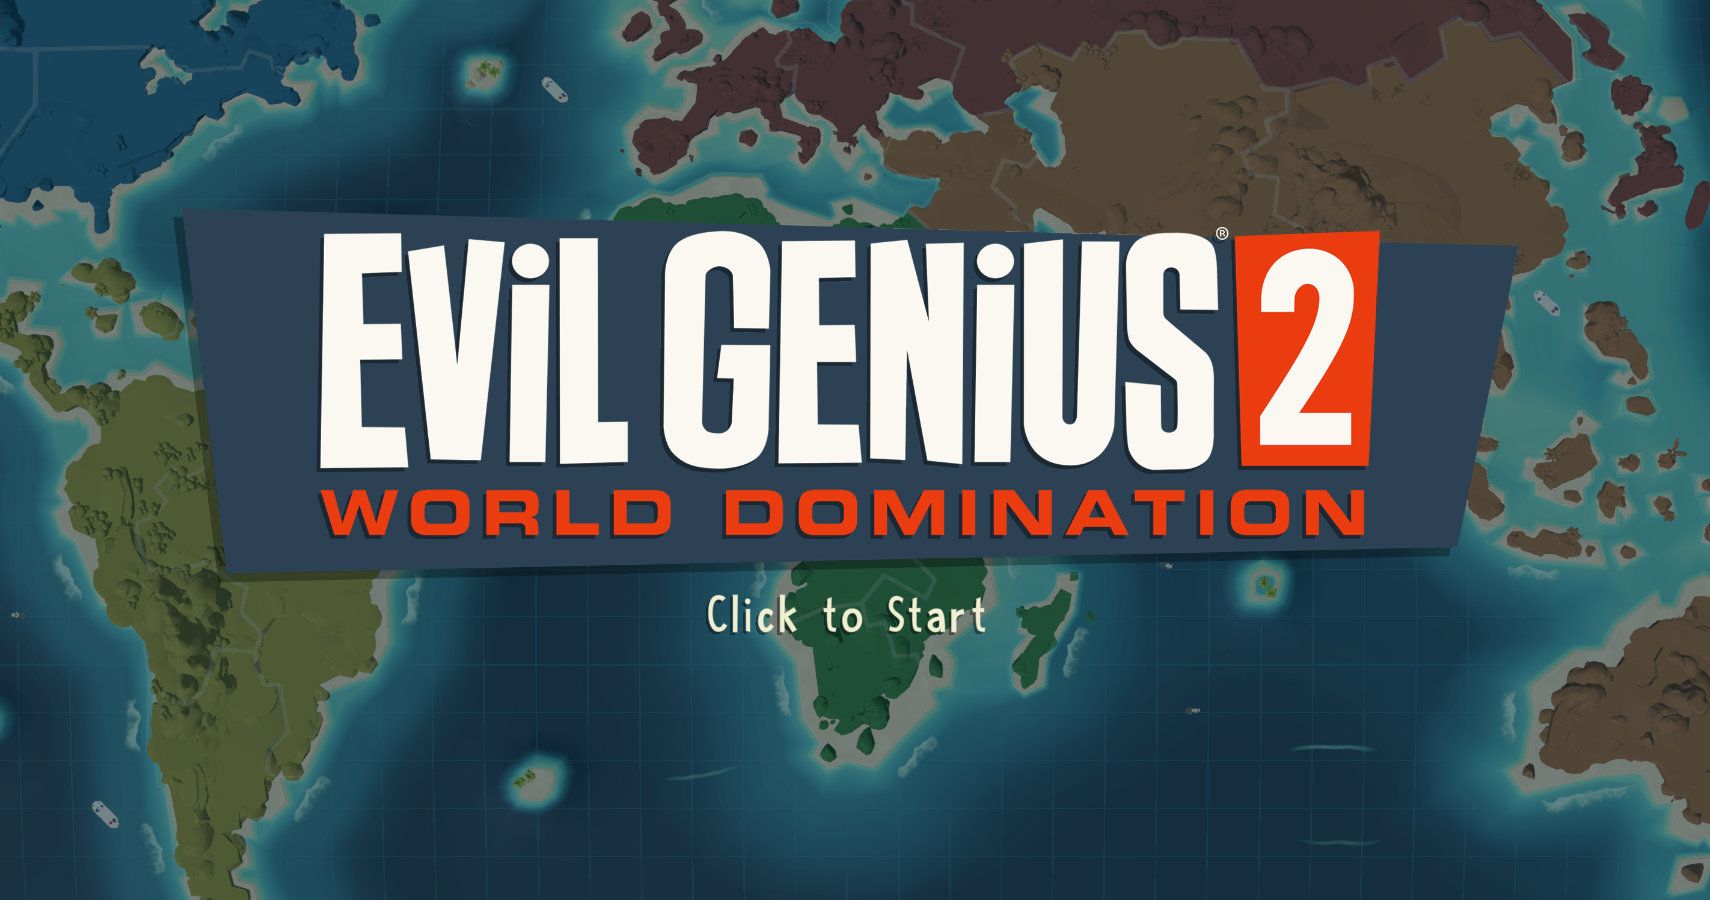 Evil Genius 2 Is Set For World Domination With Sandbox Mode Special Editions And More